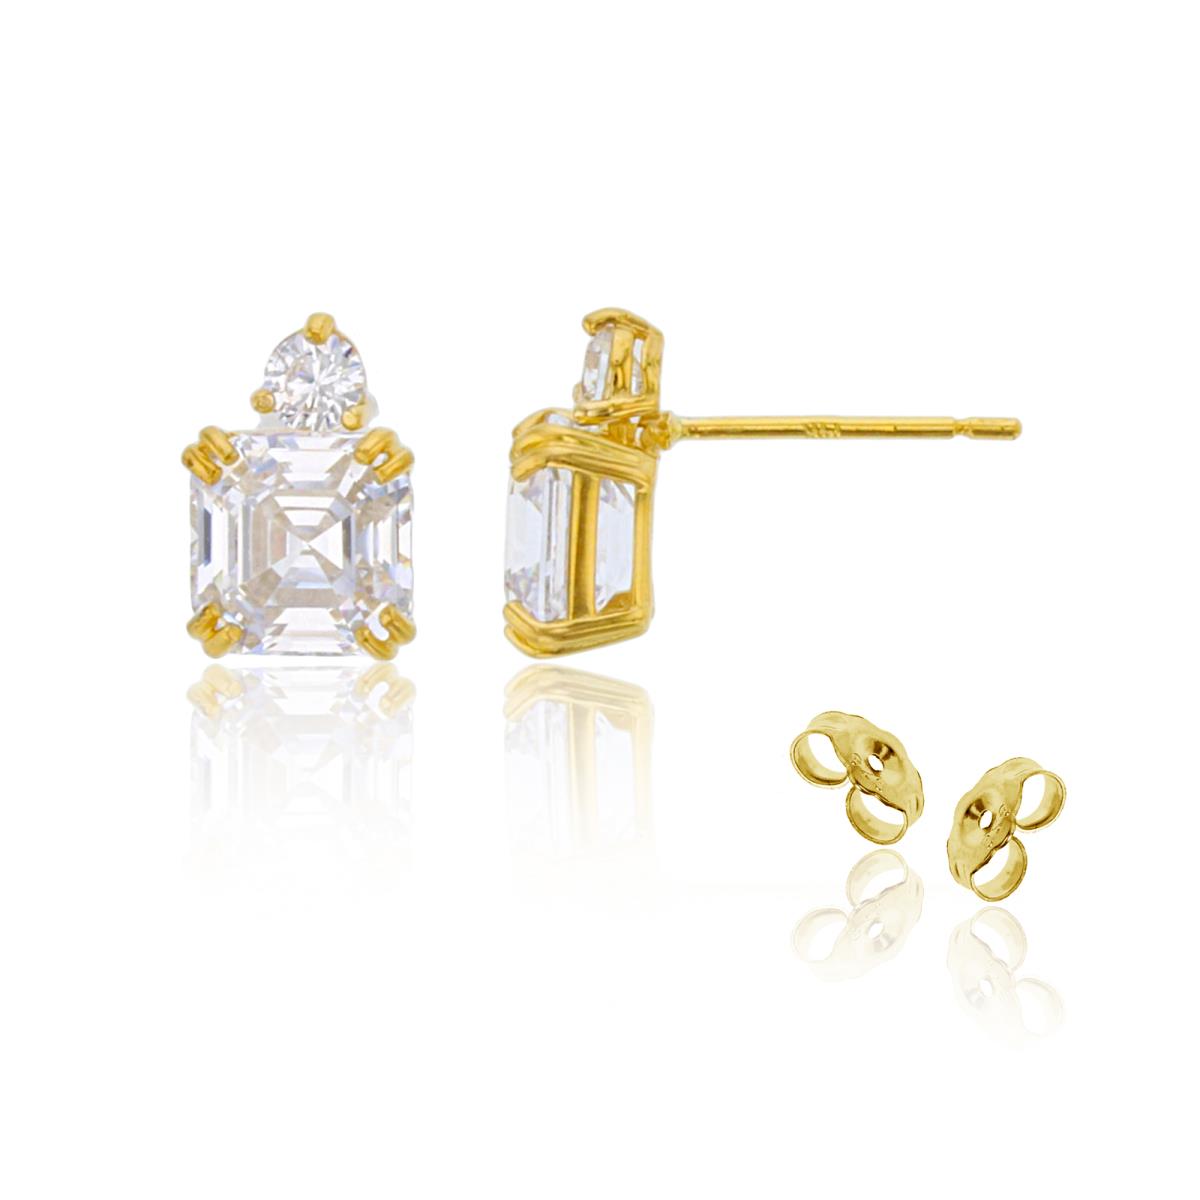 14K Yellow Gold 6mm Cush & Rnd White CZ Solitaire Studs with 4.5mm Clutch Back